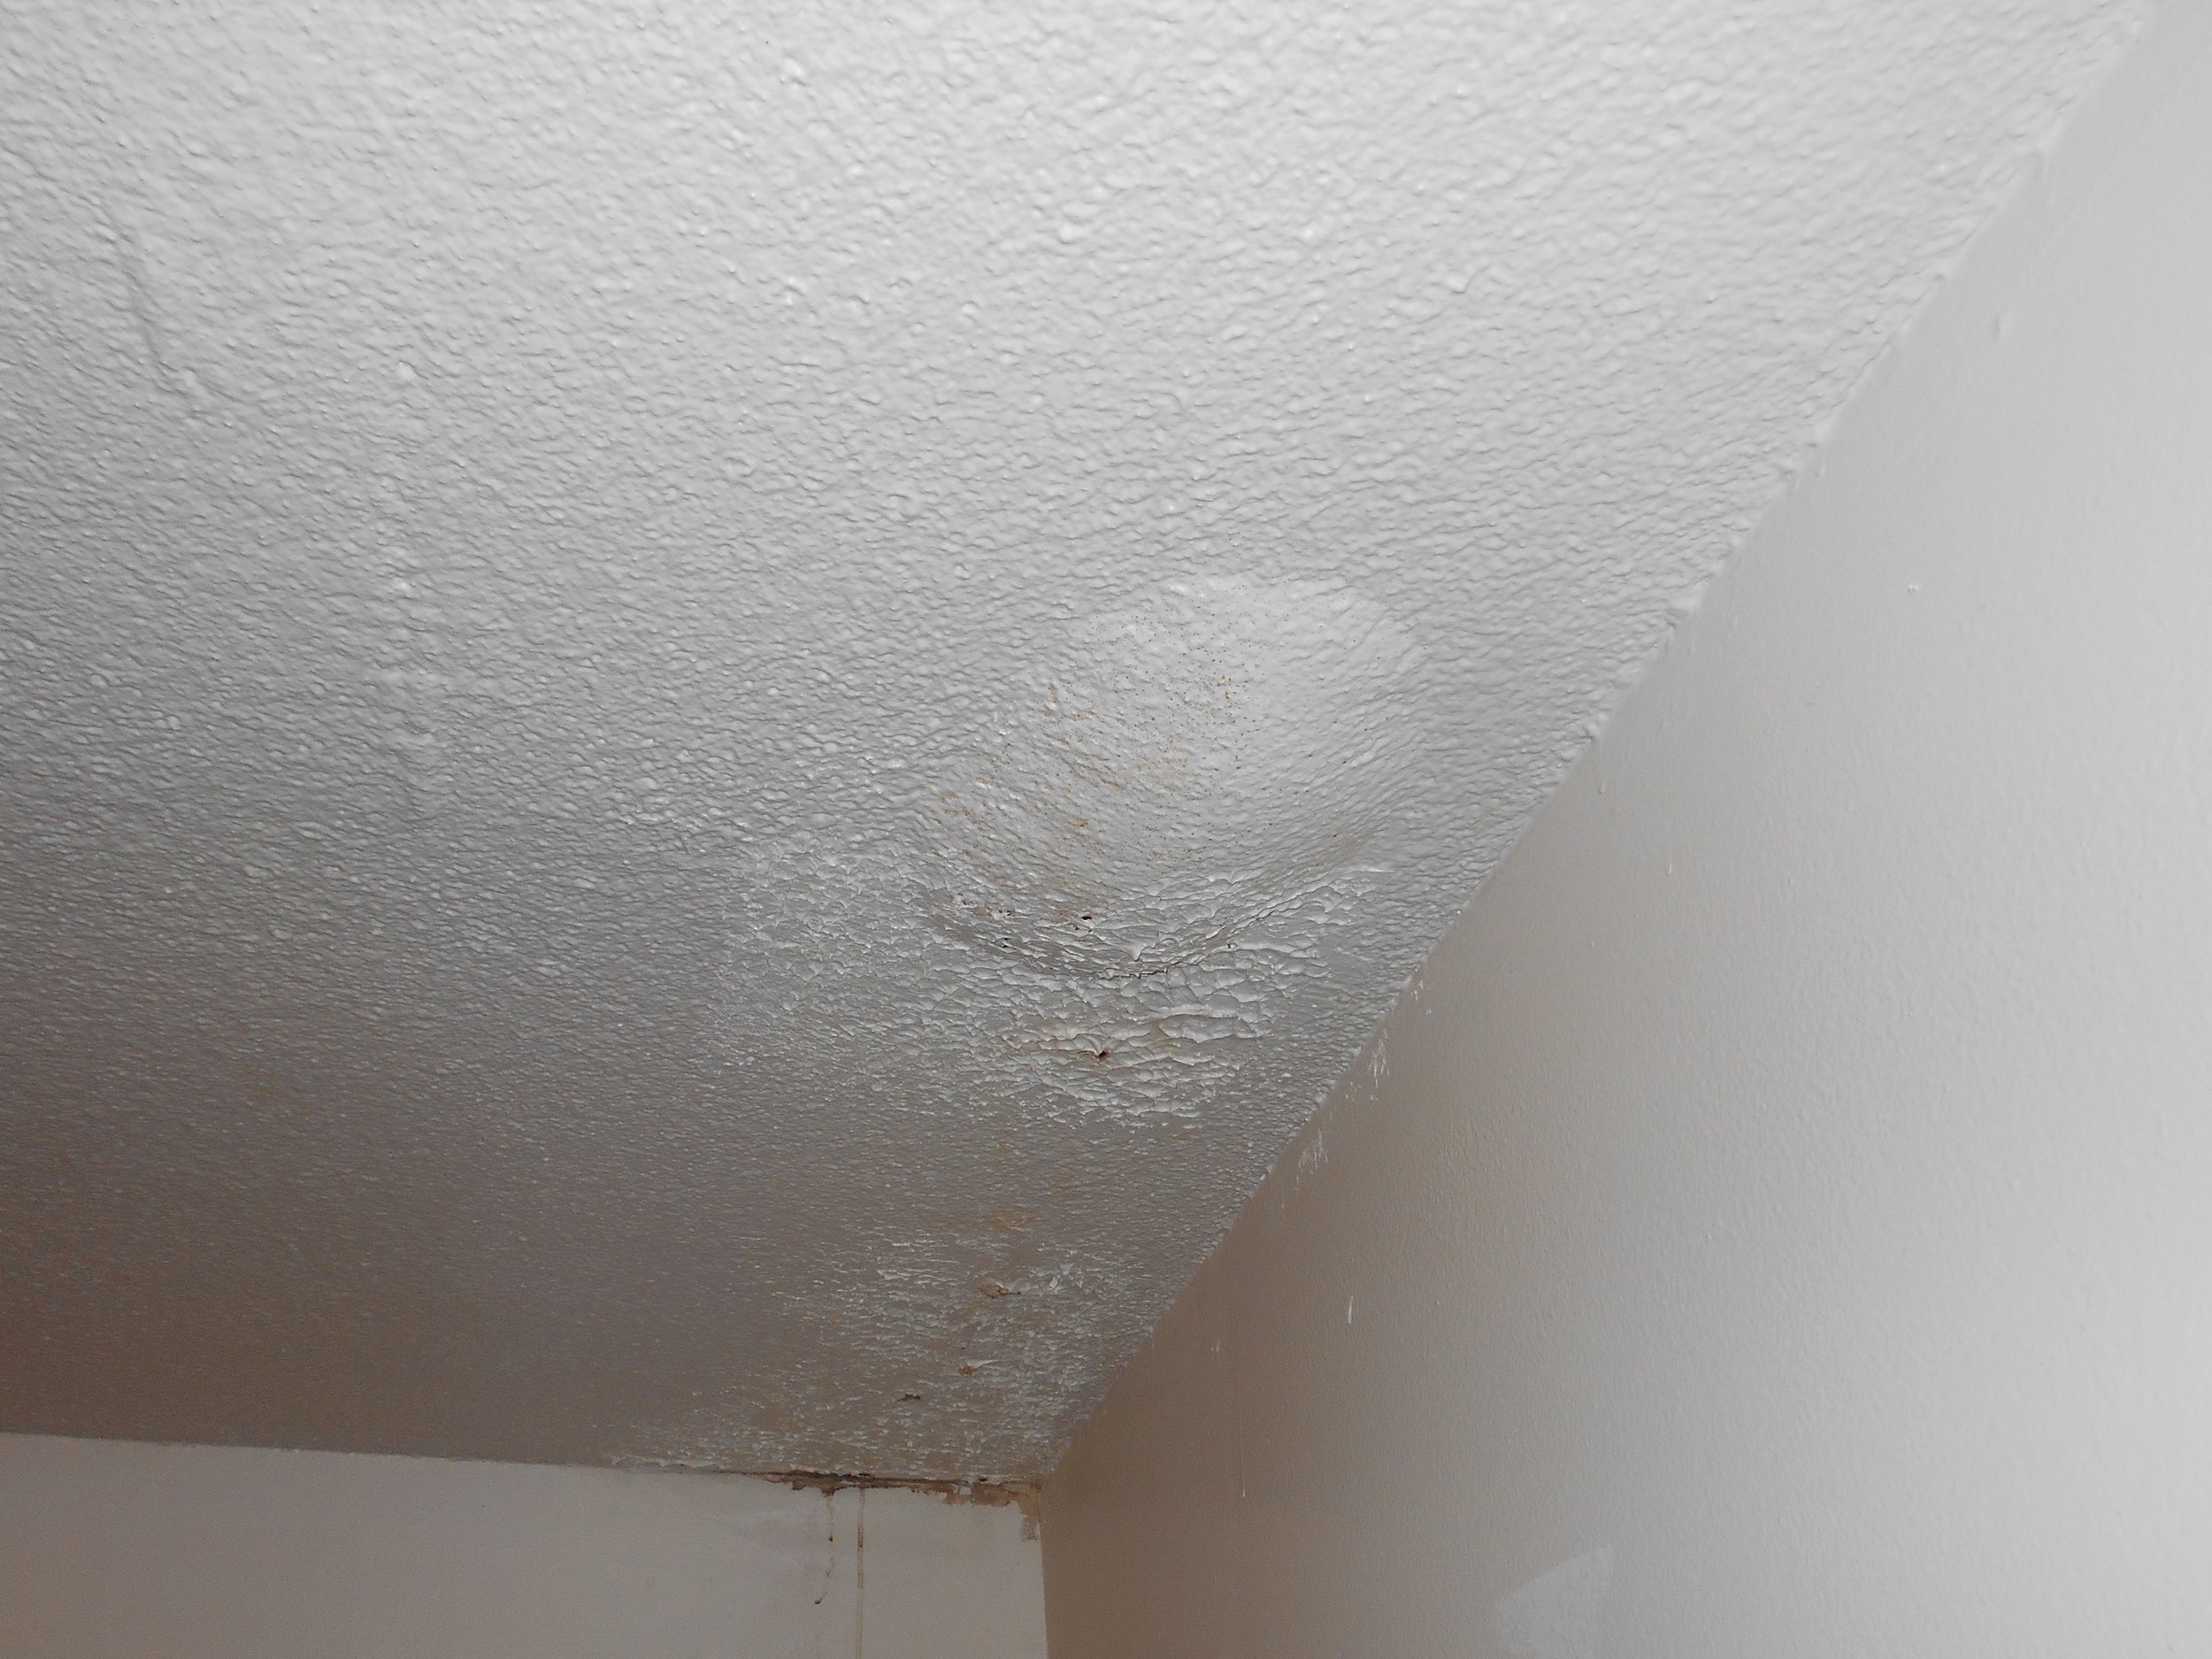 parkview tower mold and roof leaks 4.jpg